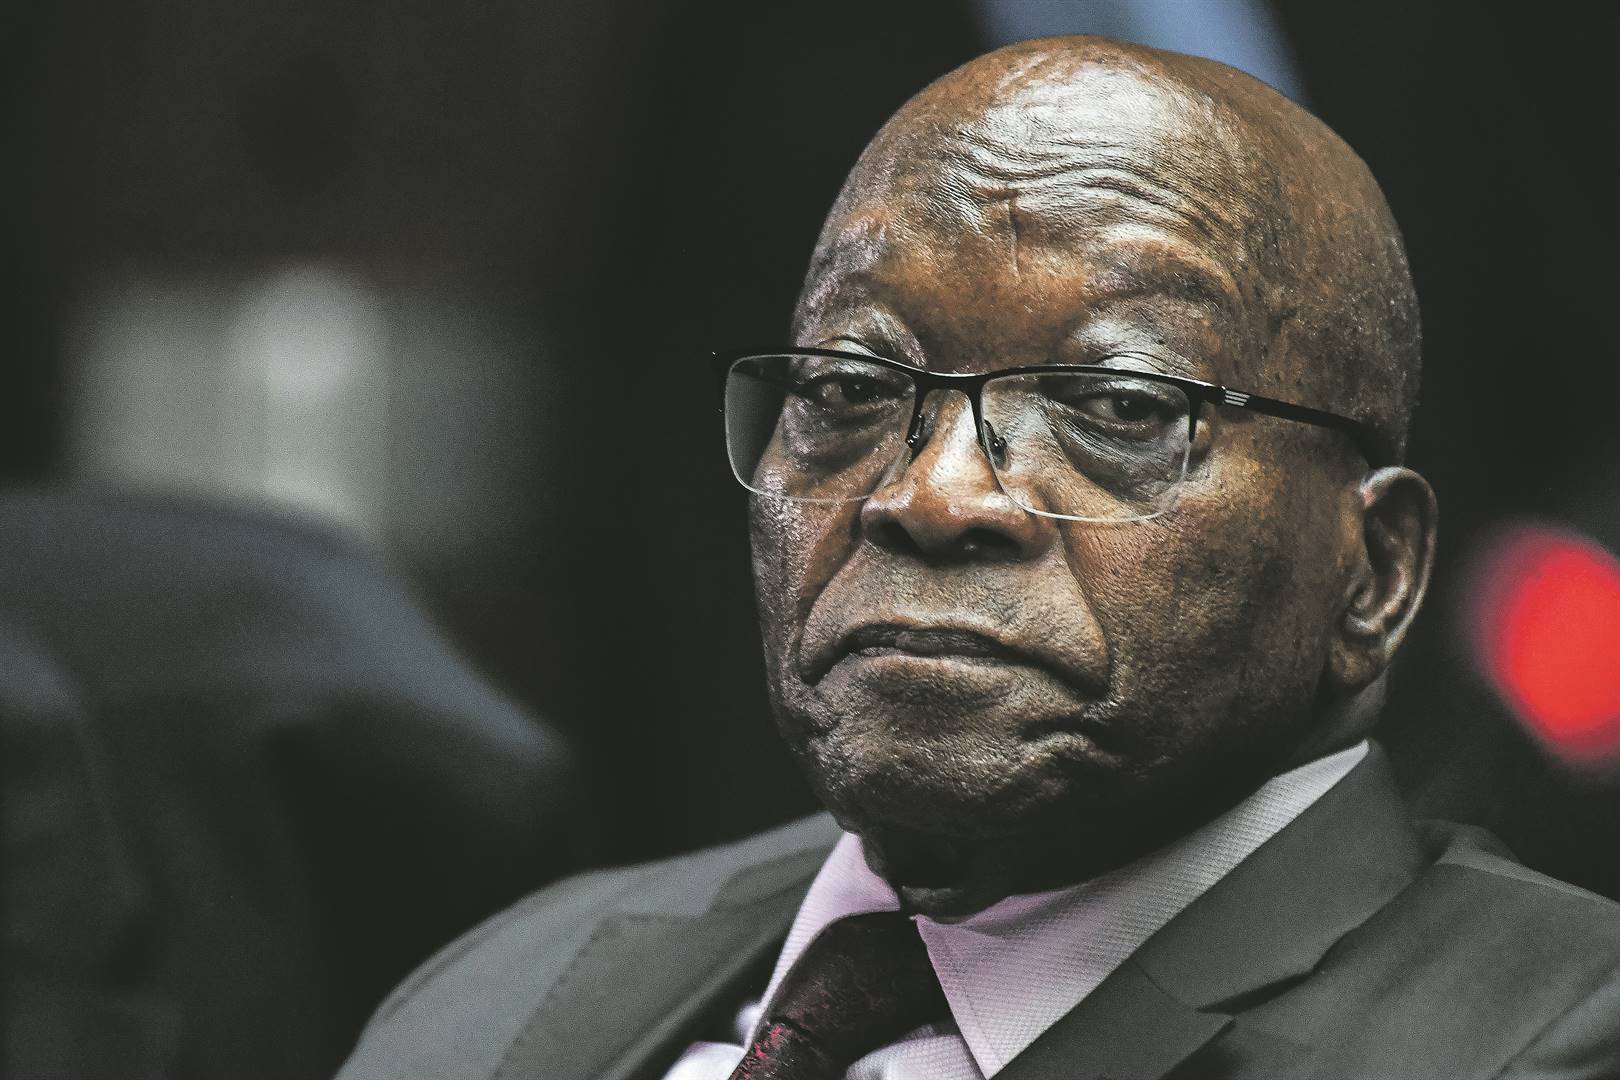 News24 | Is it time for Zuma to sell his socks? Trial date set after 20 years, R28.9m of taxpayers' money